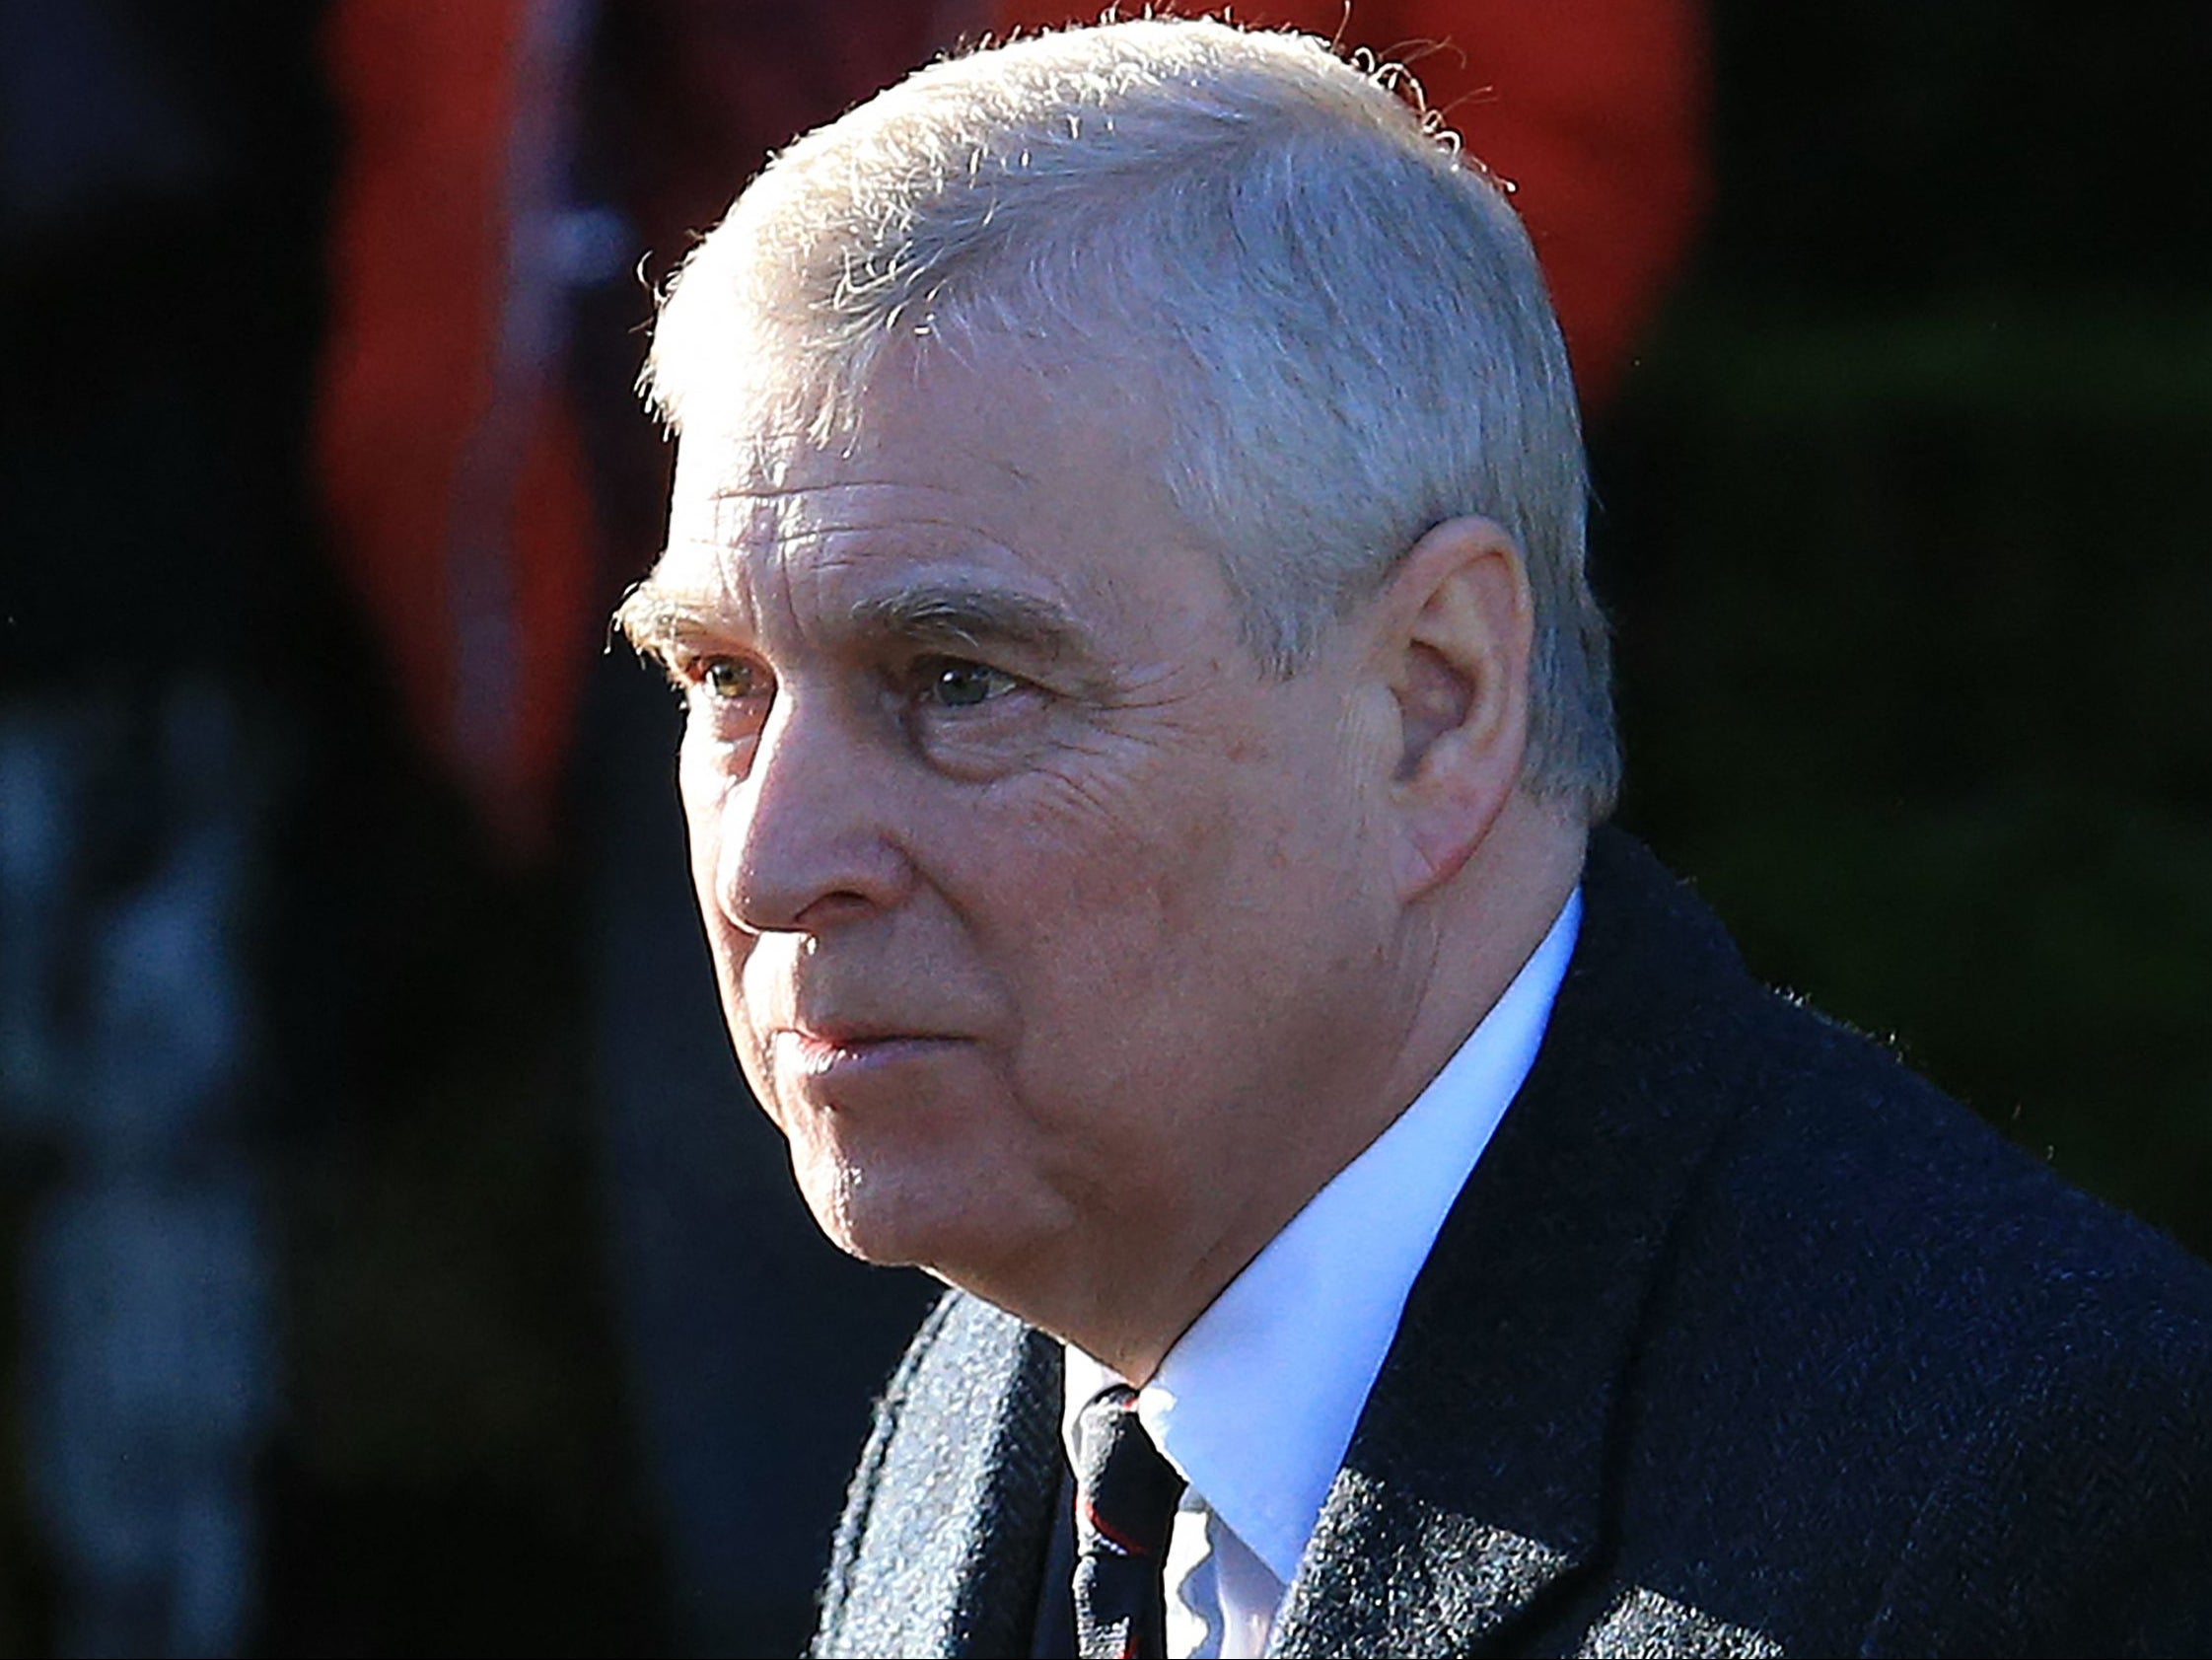 Prince Andrew has previously denied the accusations